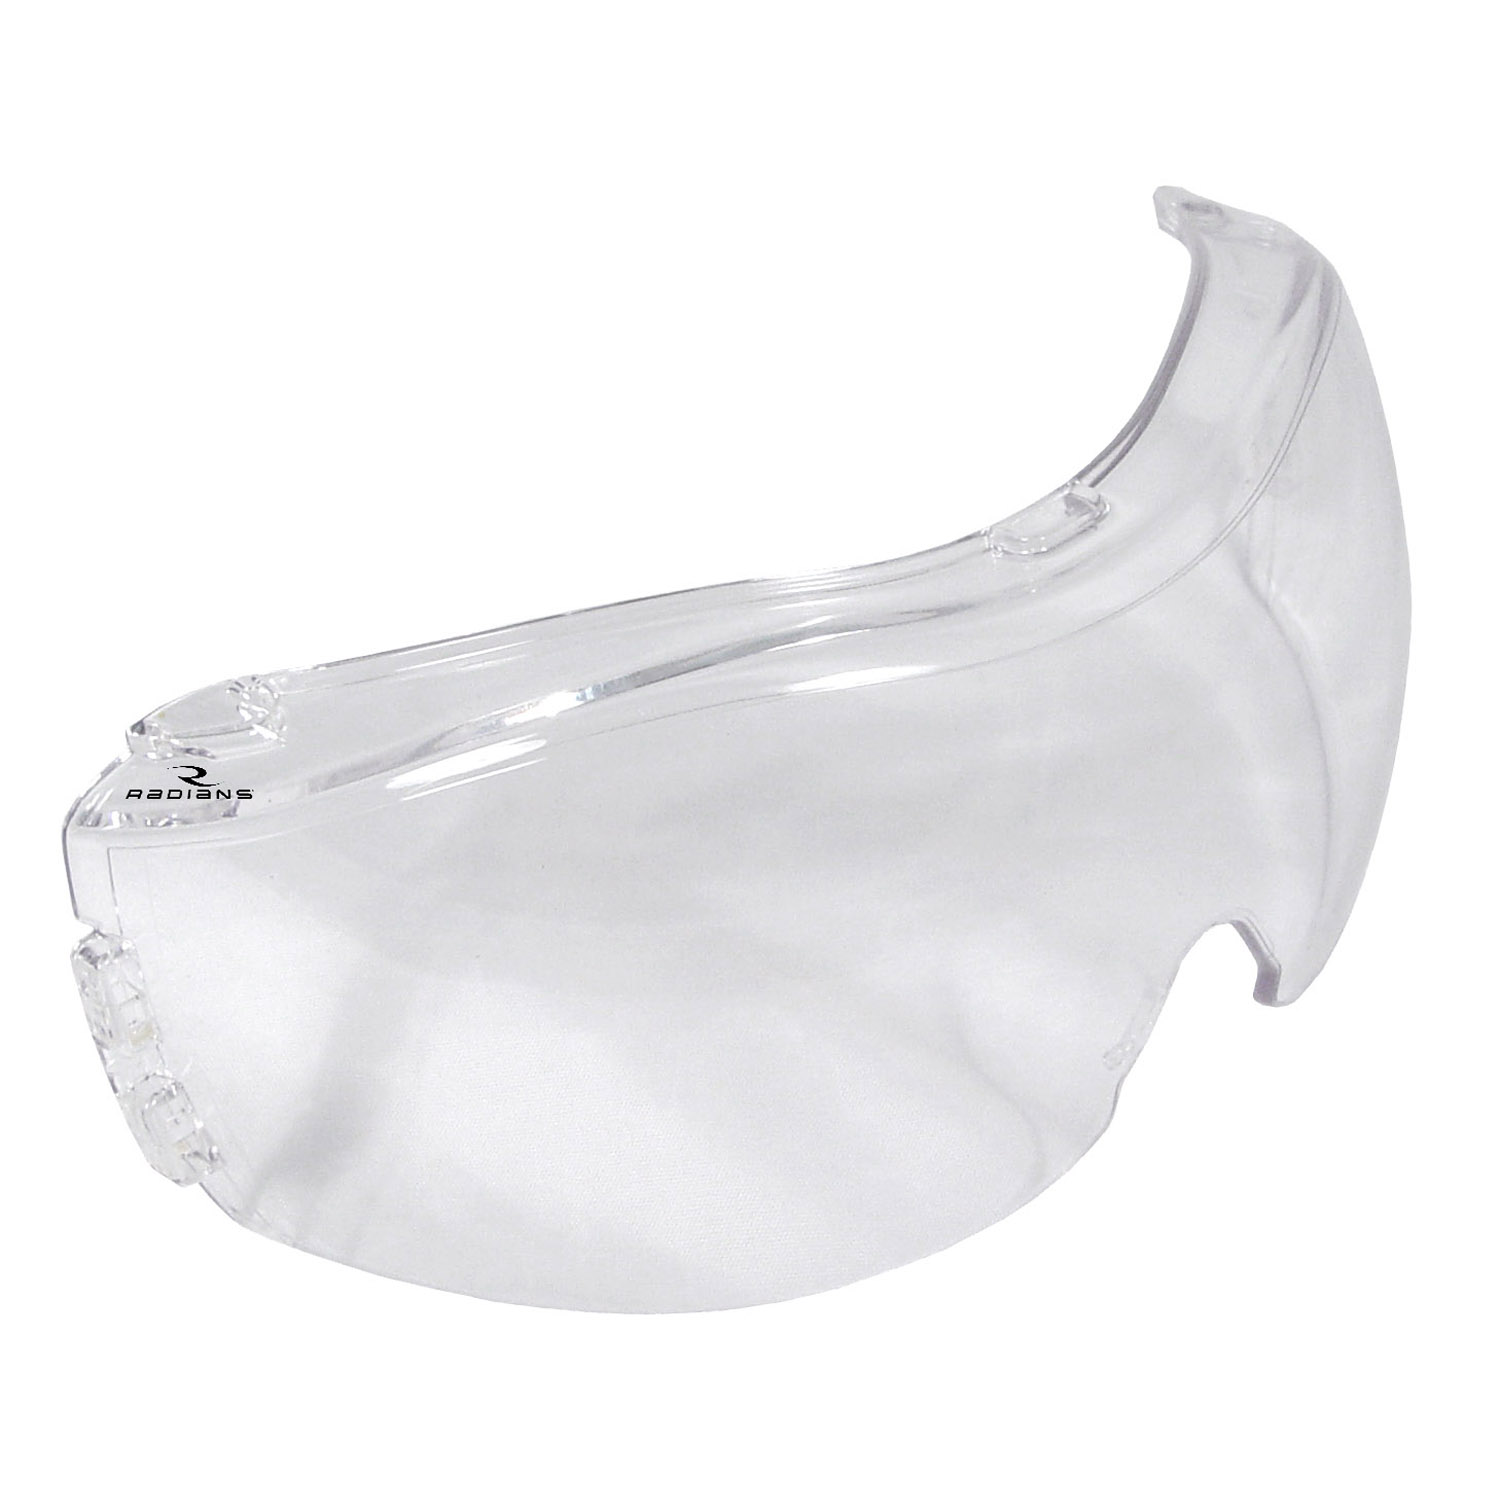 Cloak™ Dual Mold Goggle Replacement Lens - Clear Anti-Fog Lens - Goggles